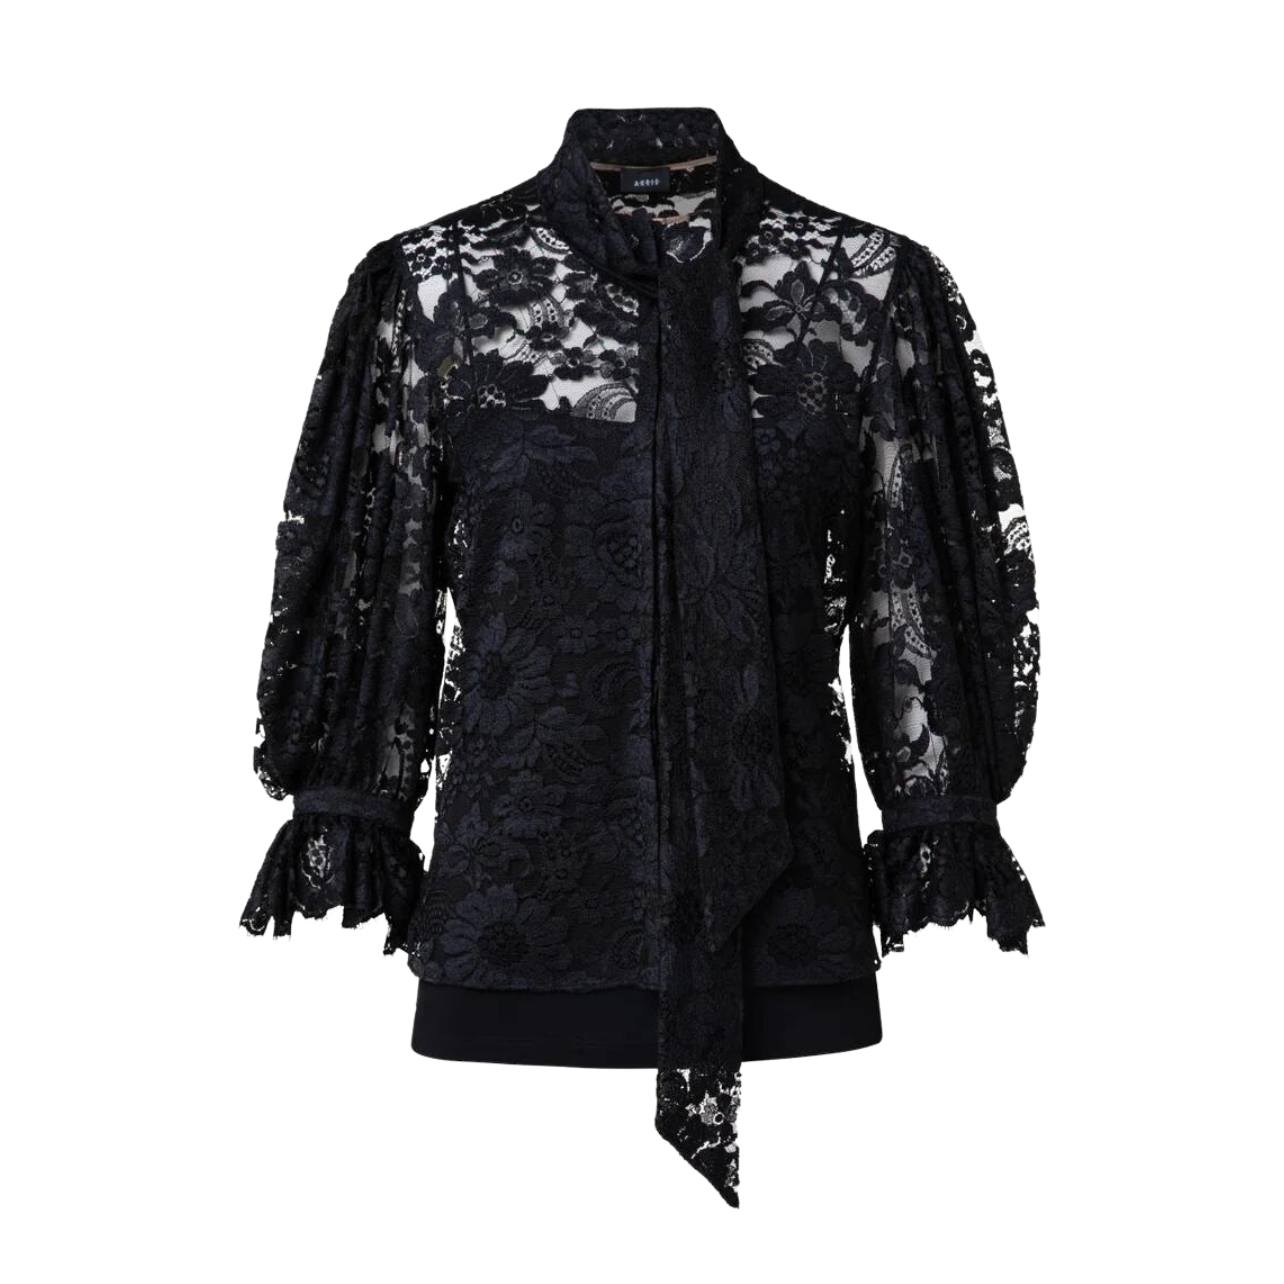 Akris black lace vintage inspired blouse with gathered shoulders and ruffle sleeves